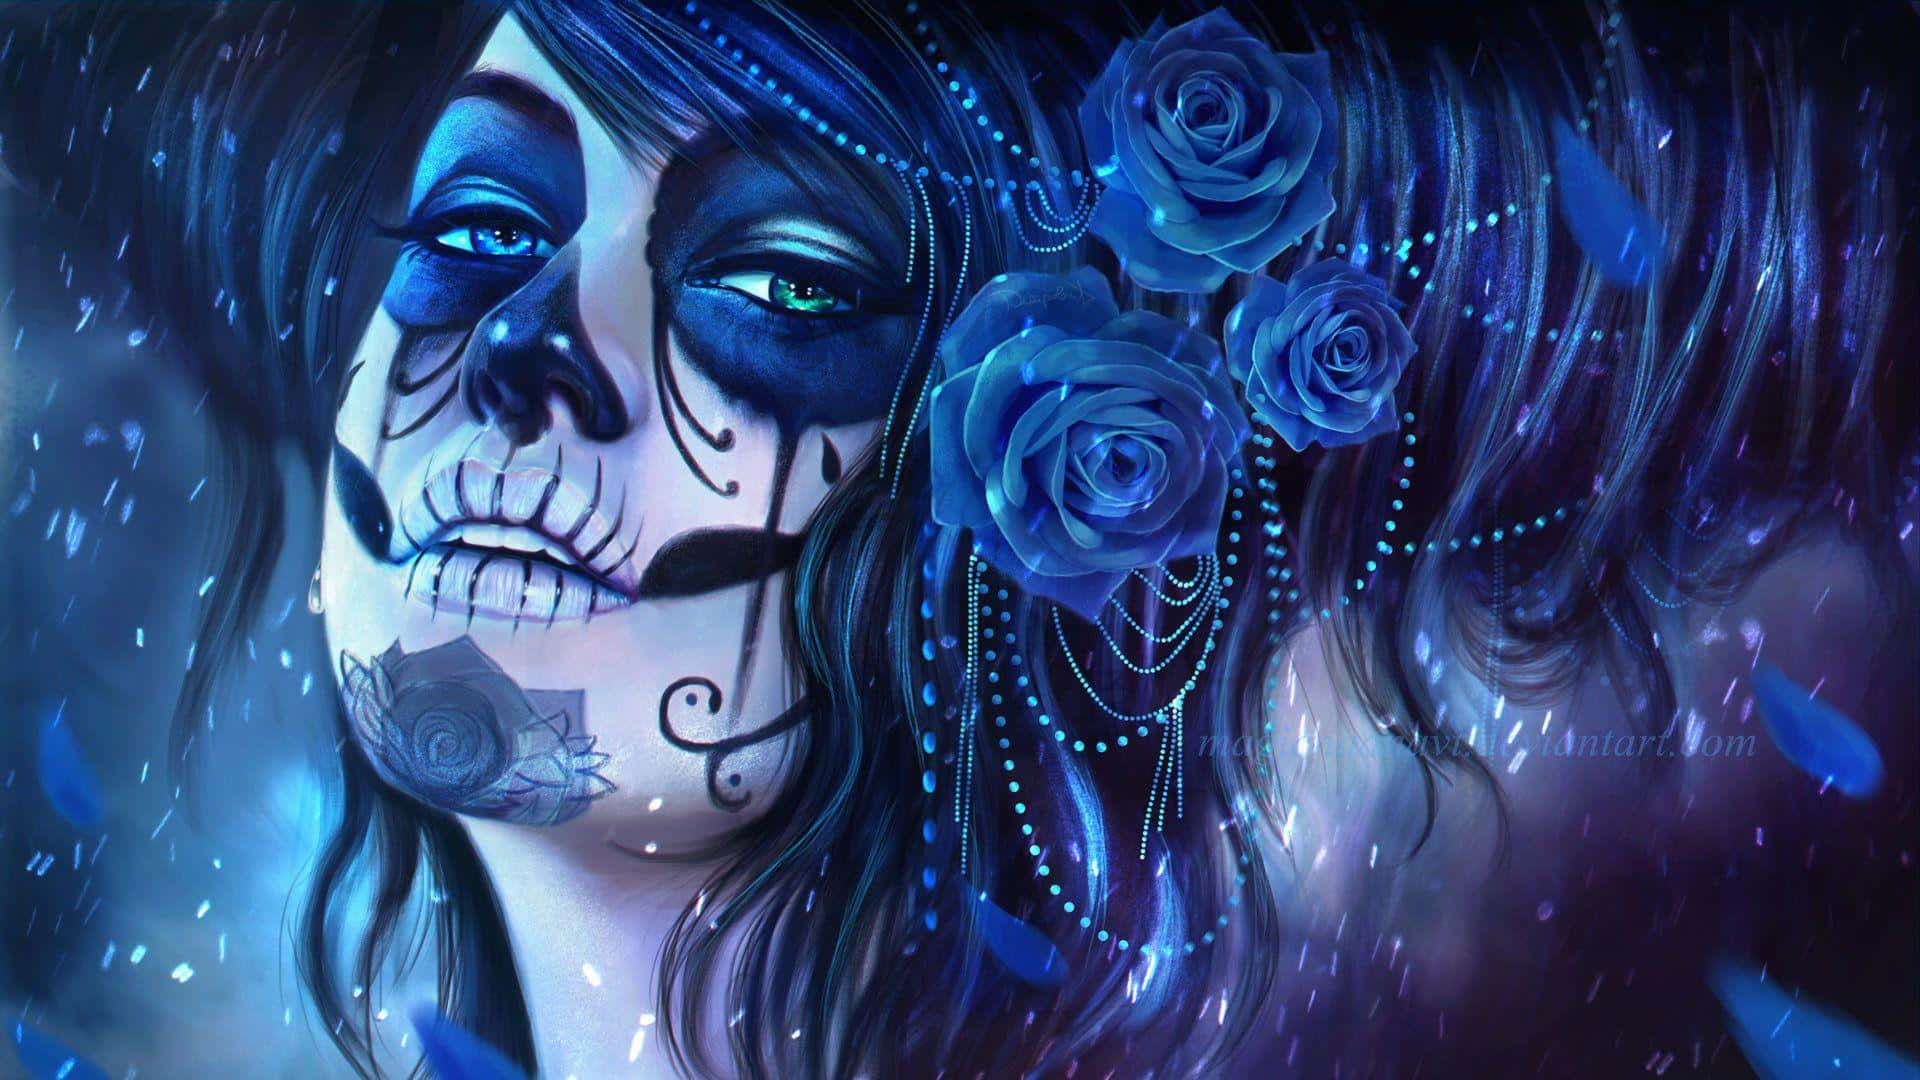 A Woman With Blue Makeup And Roses